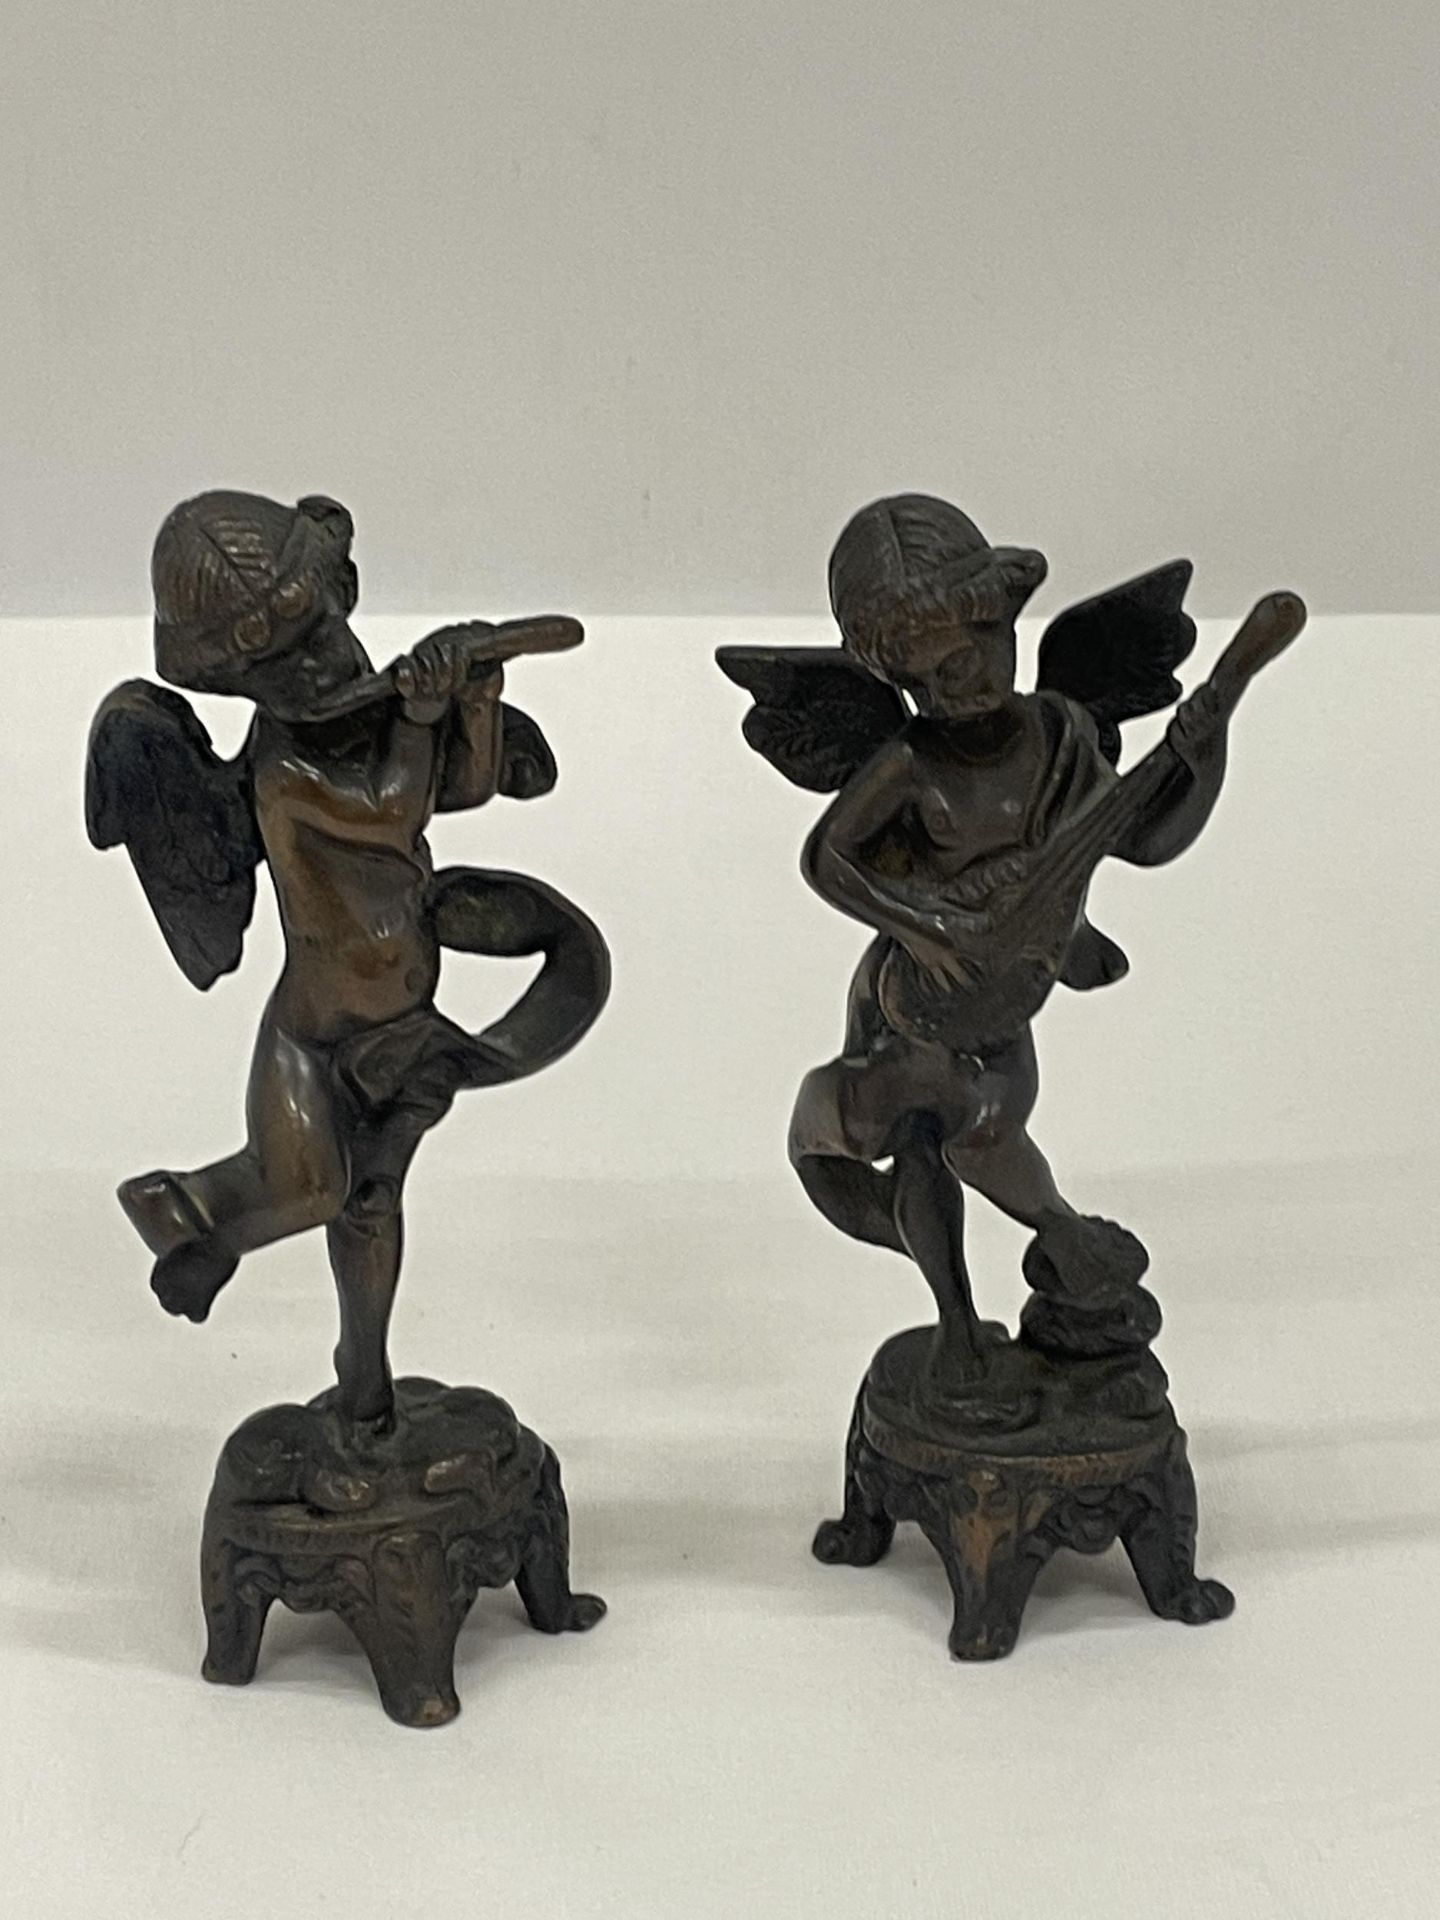 A PAIR OF BRONZE CHERUBS ONE PLAYING A LUTE AND ONE A FLUTE APPROXIMATELY 6 INCHES TALL